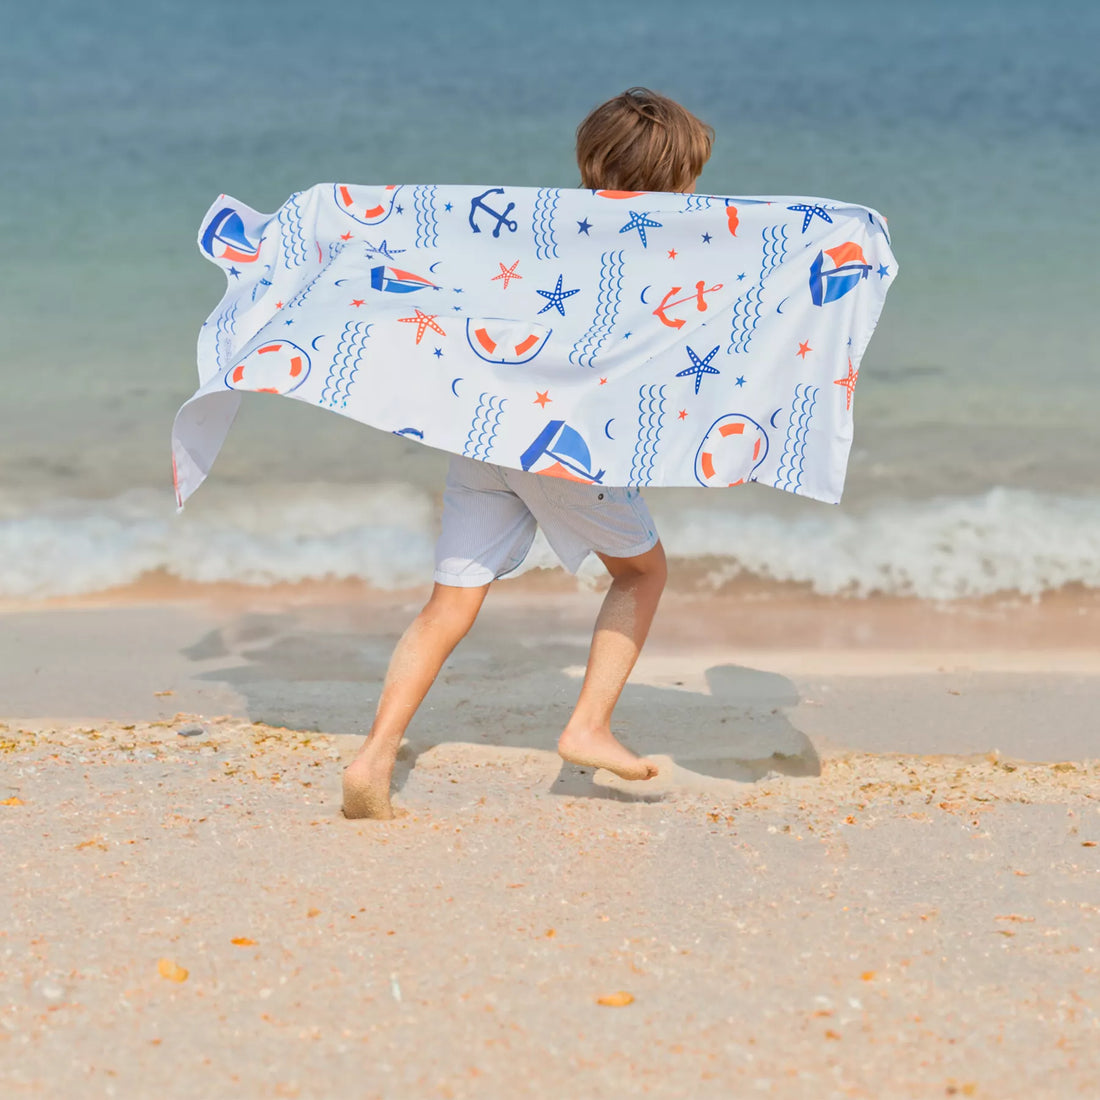 A kid holding a Quick Dry, Sand Free, Light Weight, Compact and Ecofriendly Microfiber Beach Towel from La Toalla designed for kids